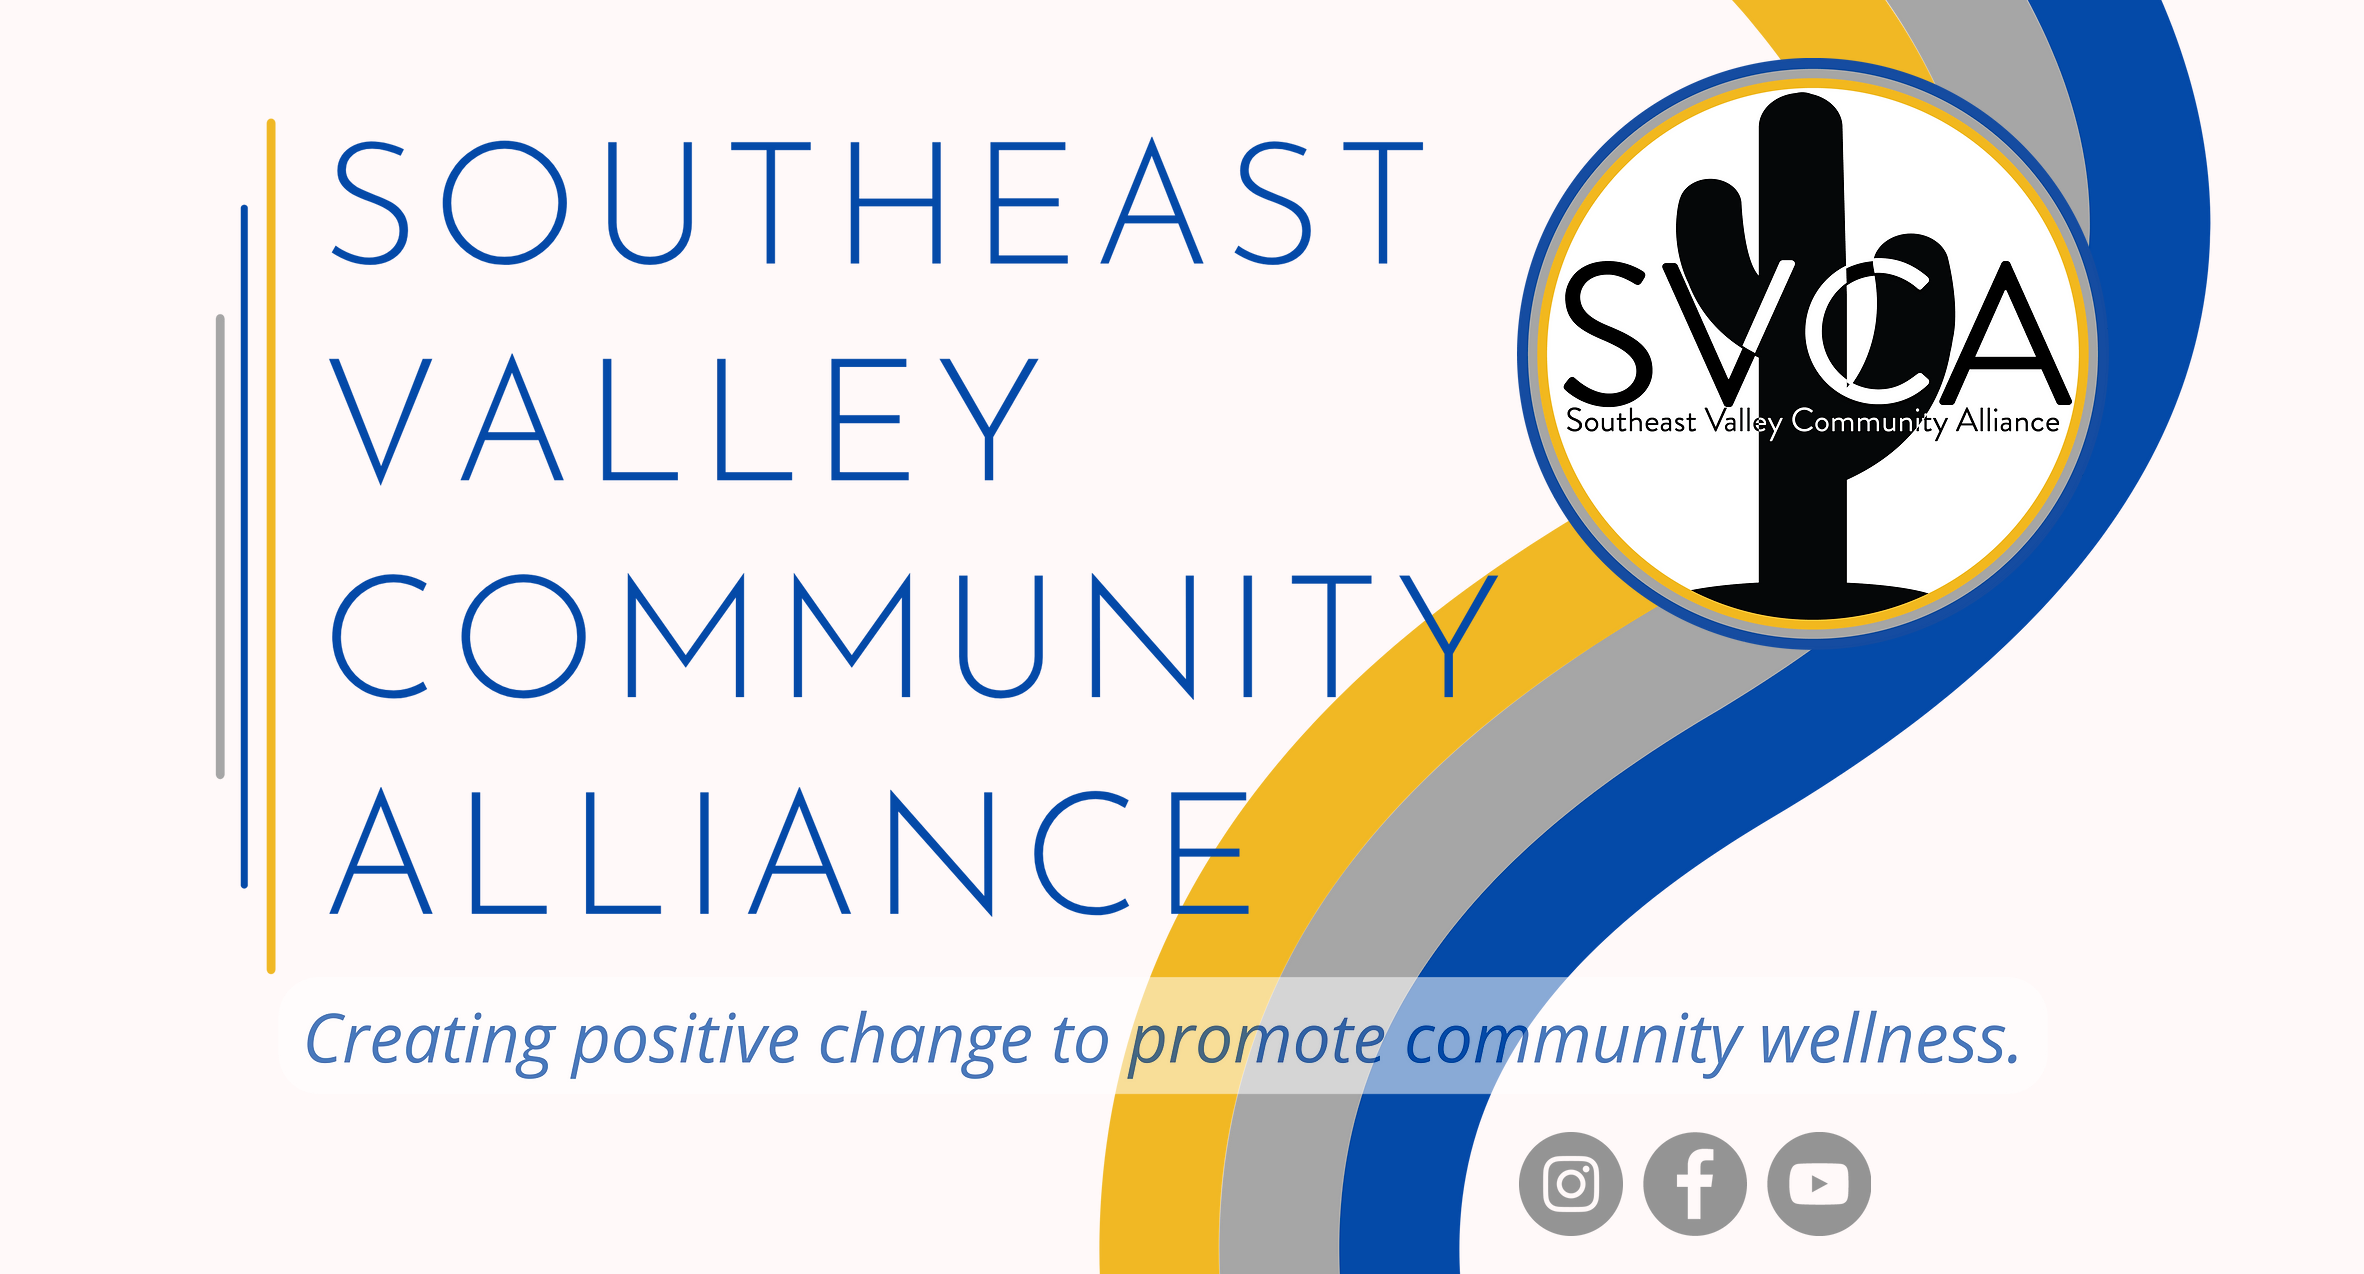 Southeast Valley Community Alliance